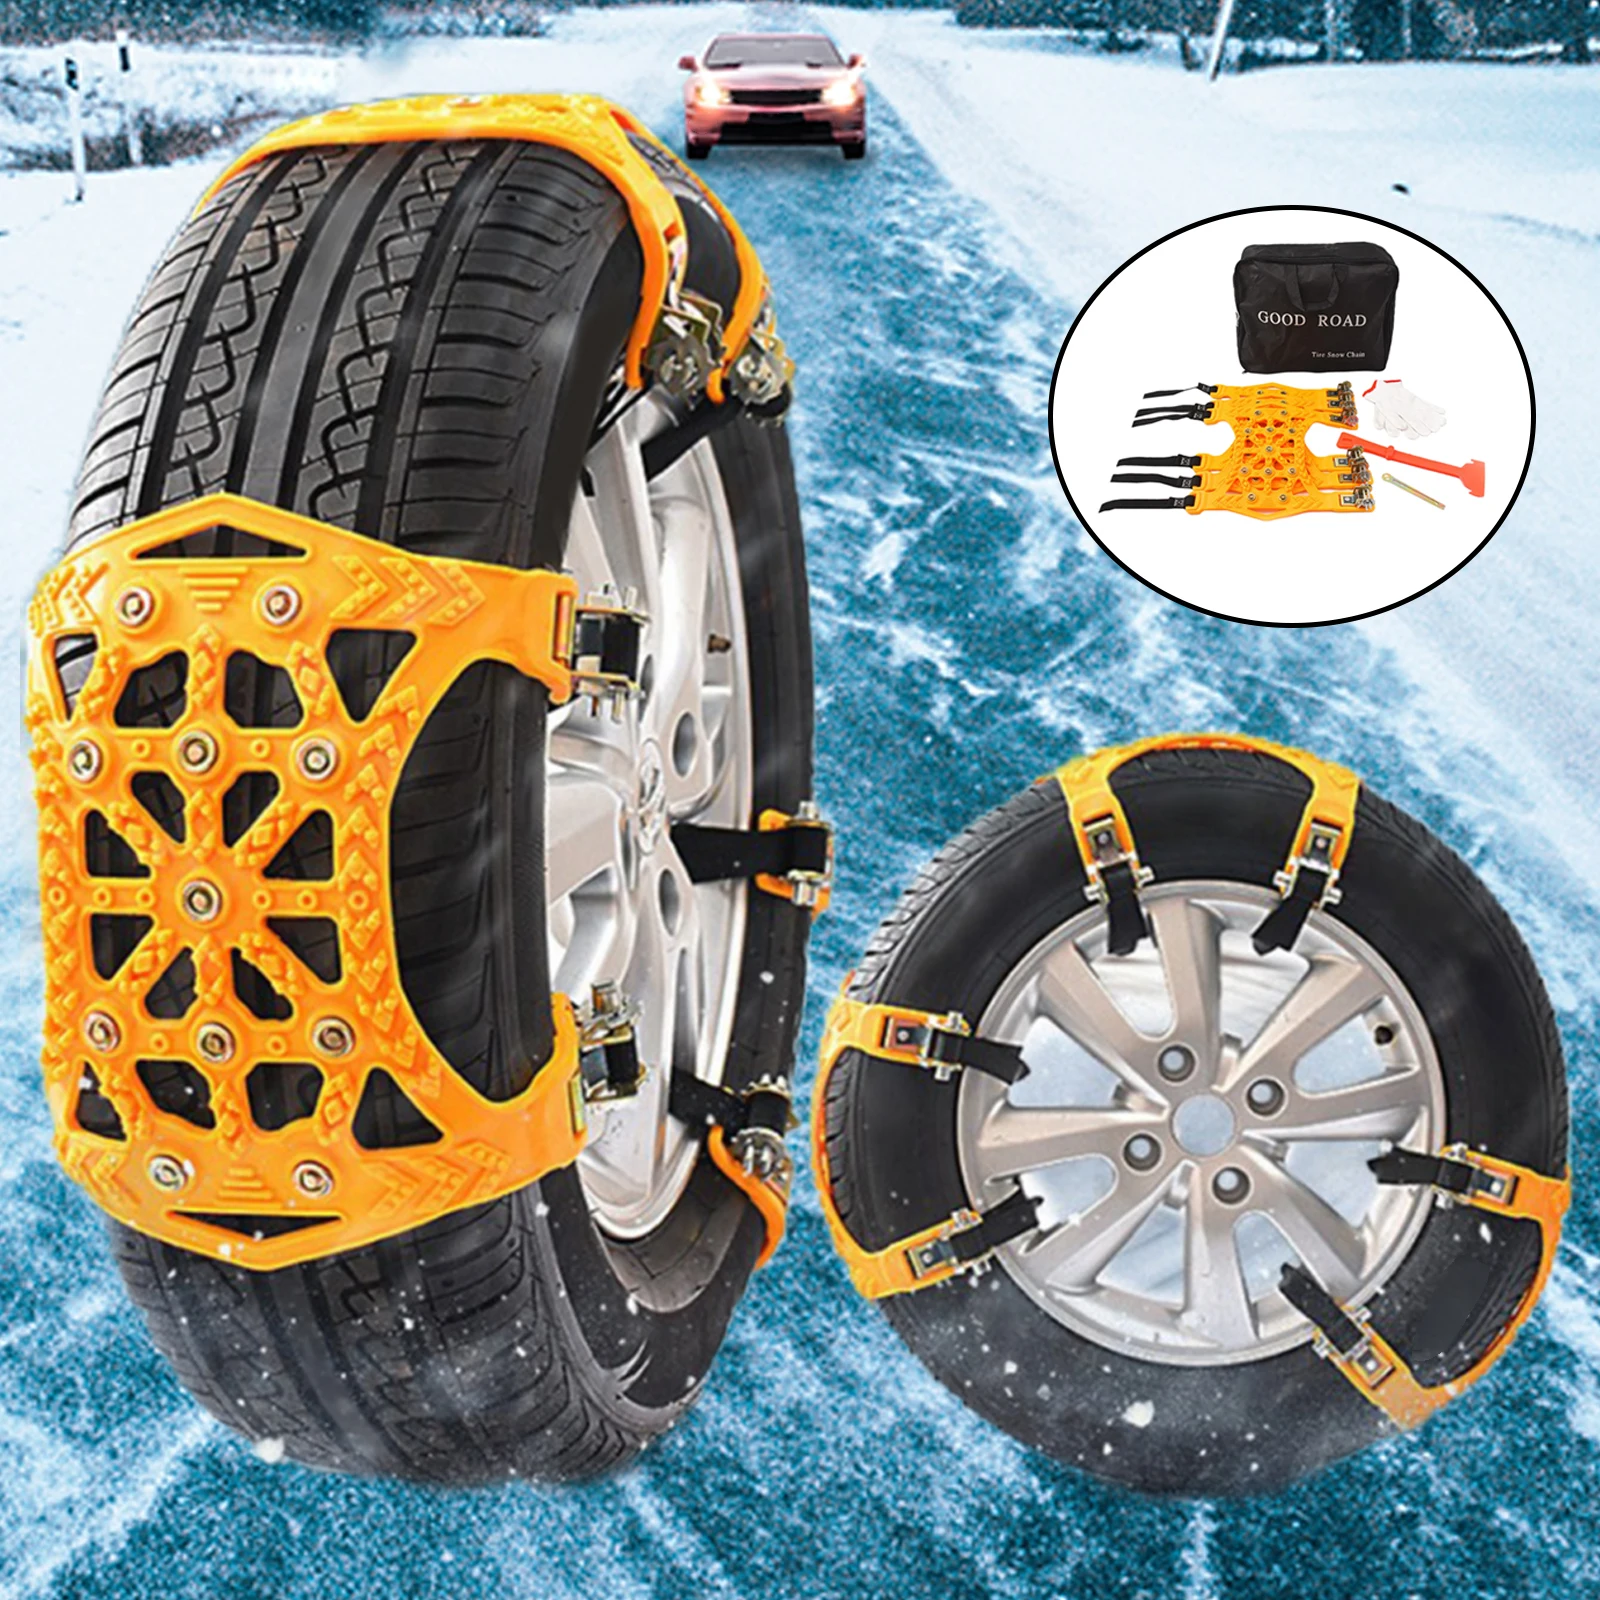 Set of 6Pcs Tire Chains, Applicable Tire Width 165-265mm for Icy Roads